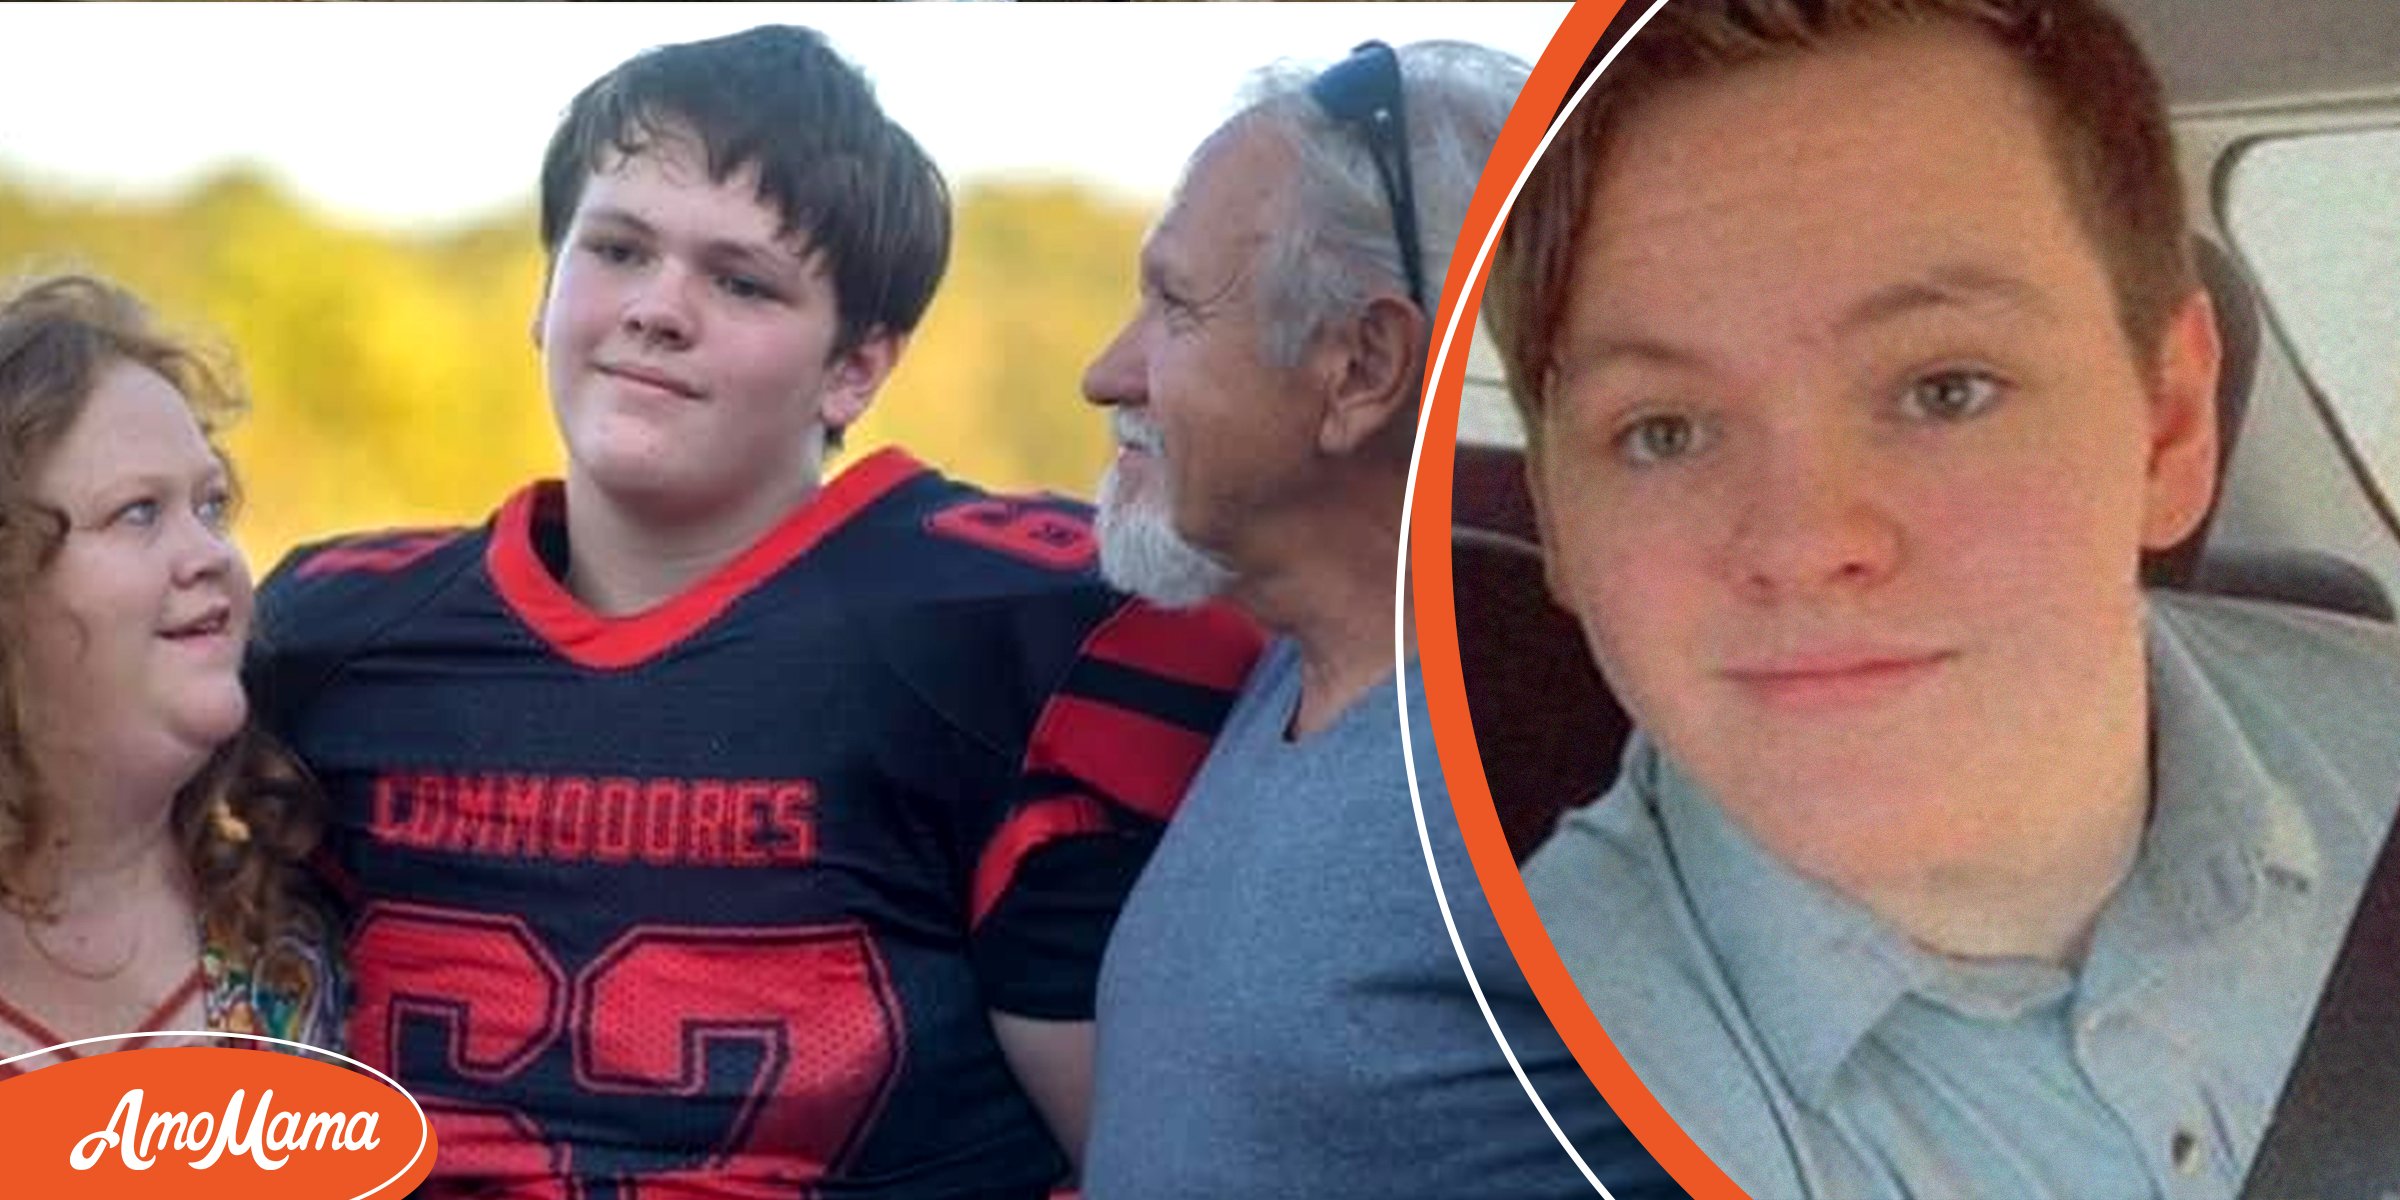 Boy dies after helping the Kentucky Flood Victims. He donates his organs to help more people.